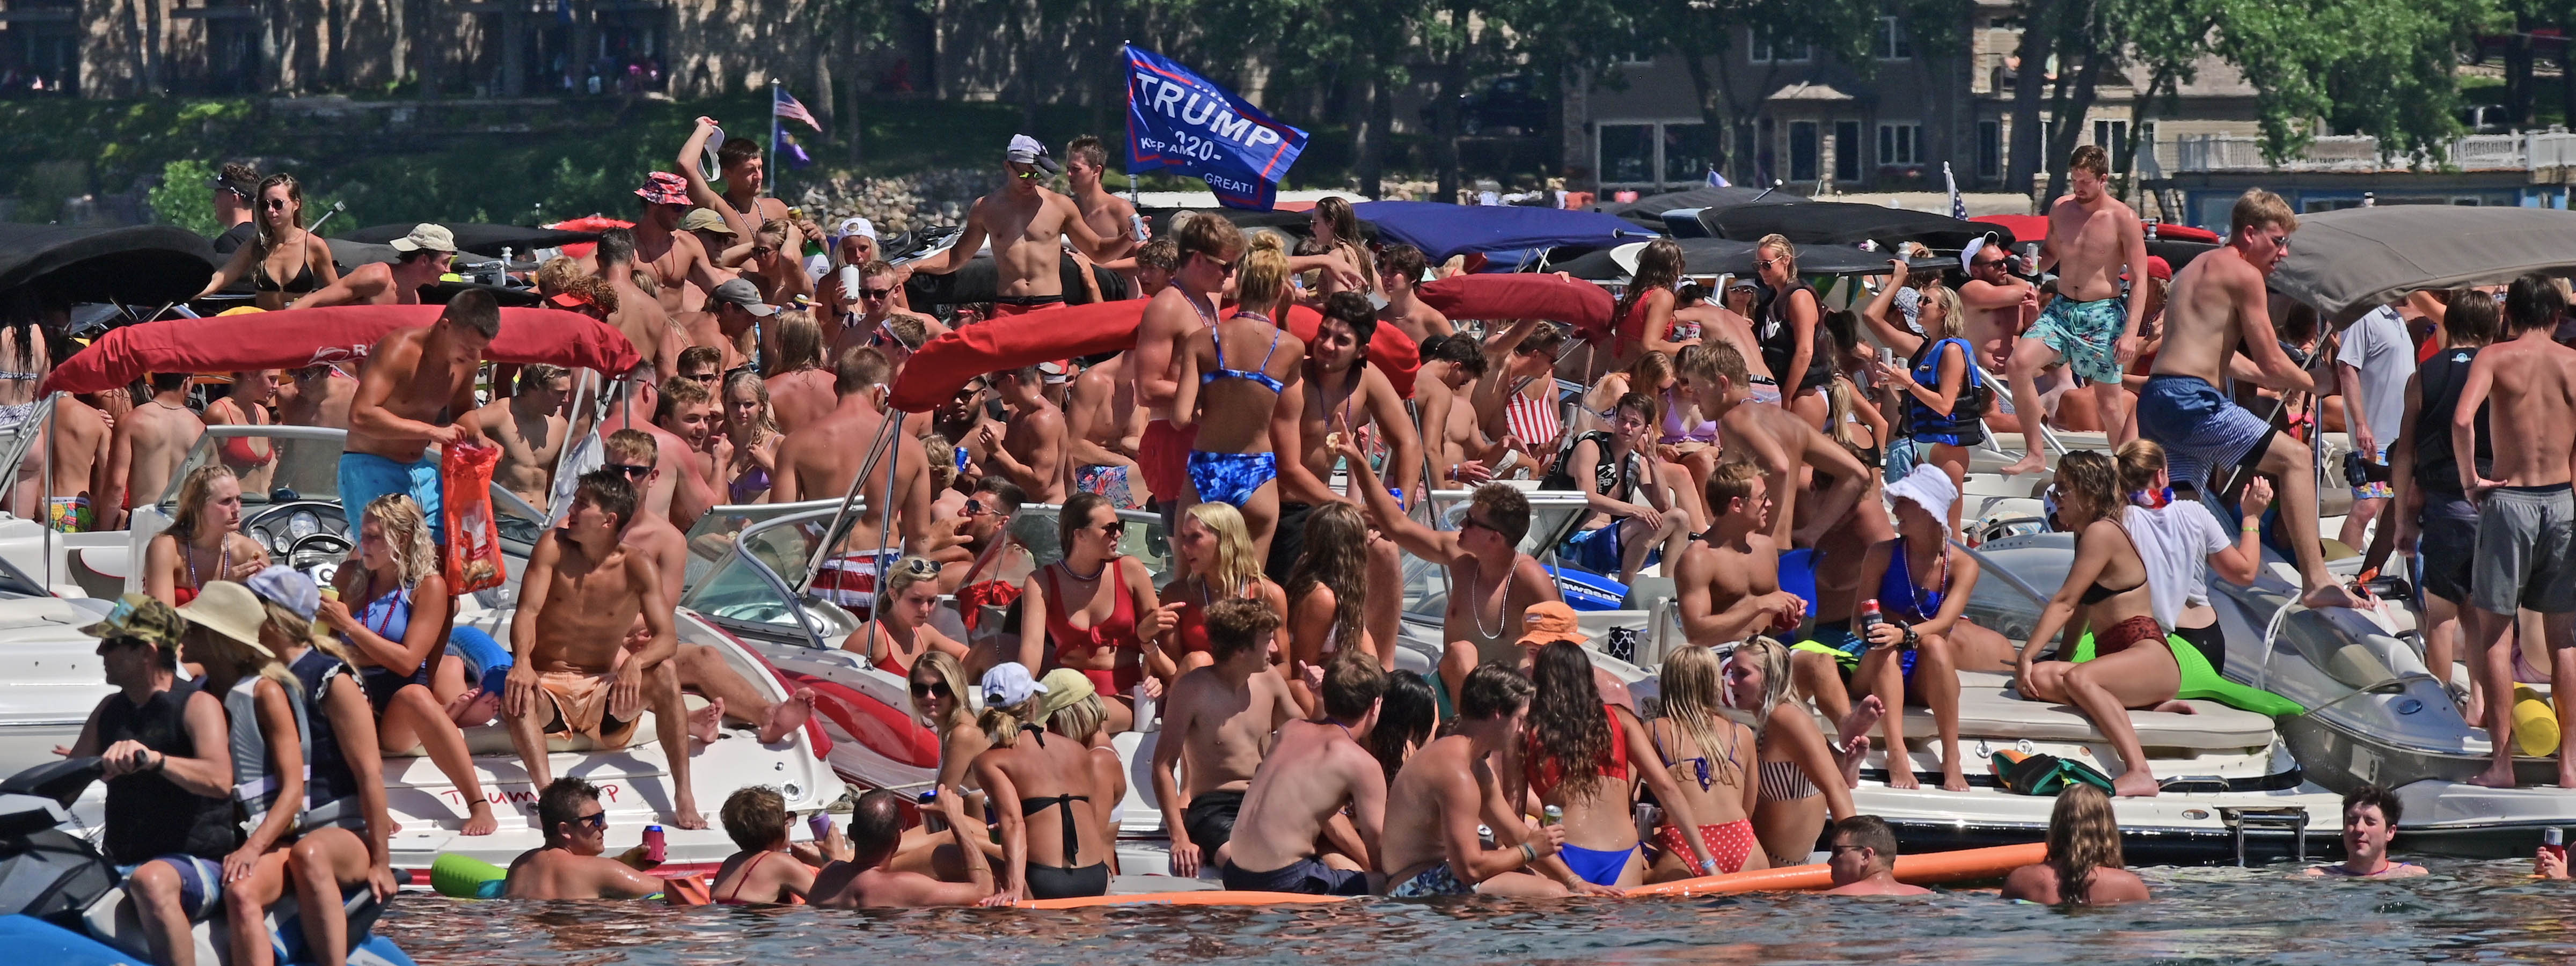 A crowd of people in bathing suits floating on rafts on a lake.